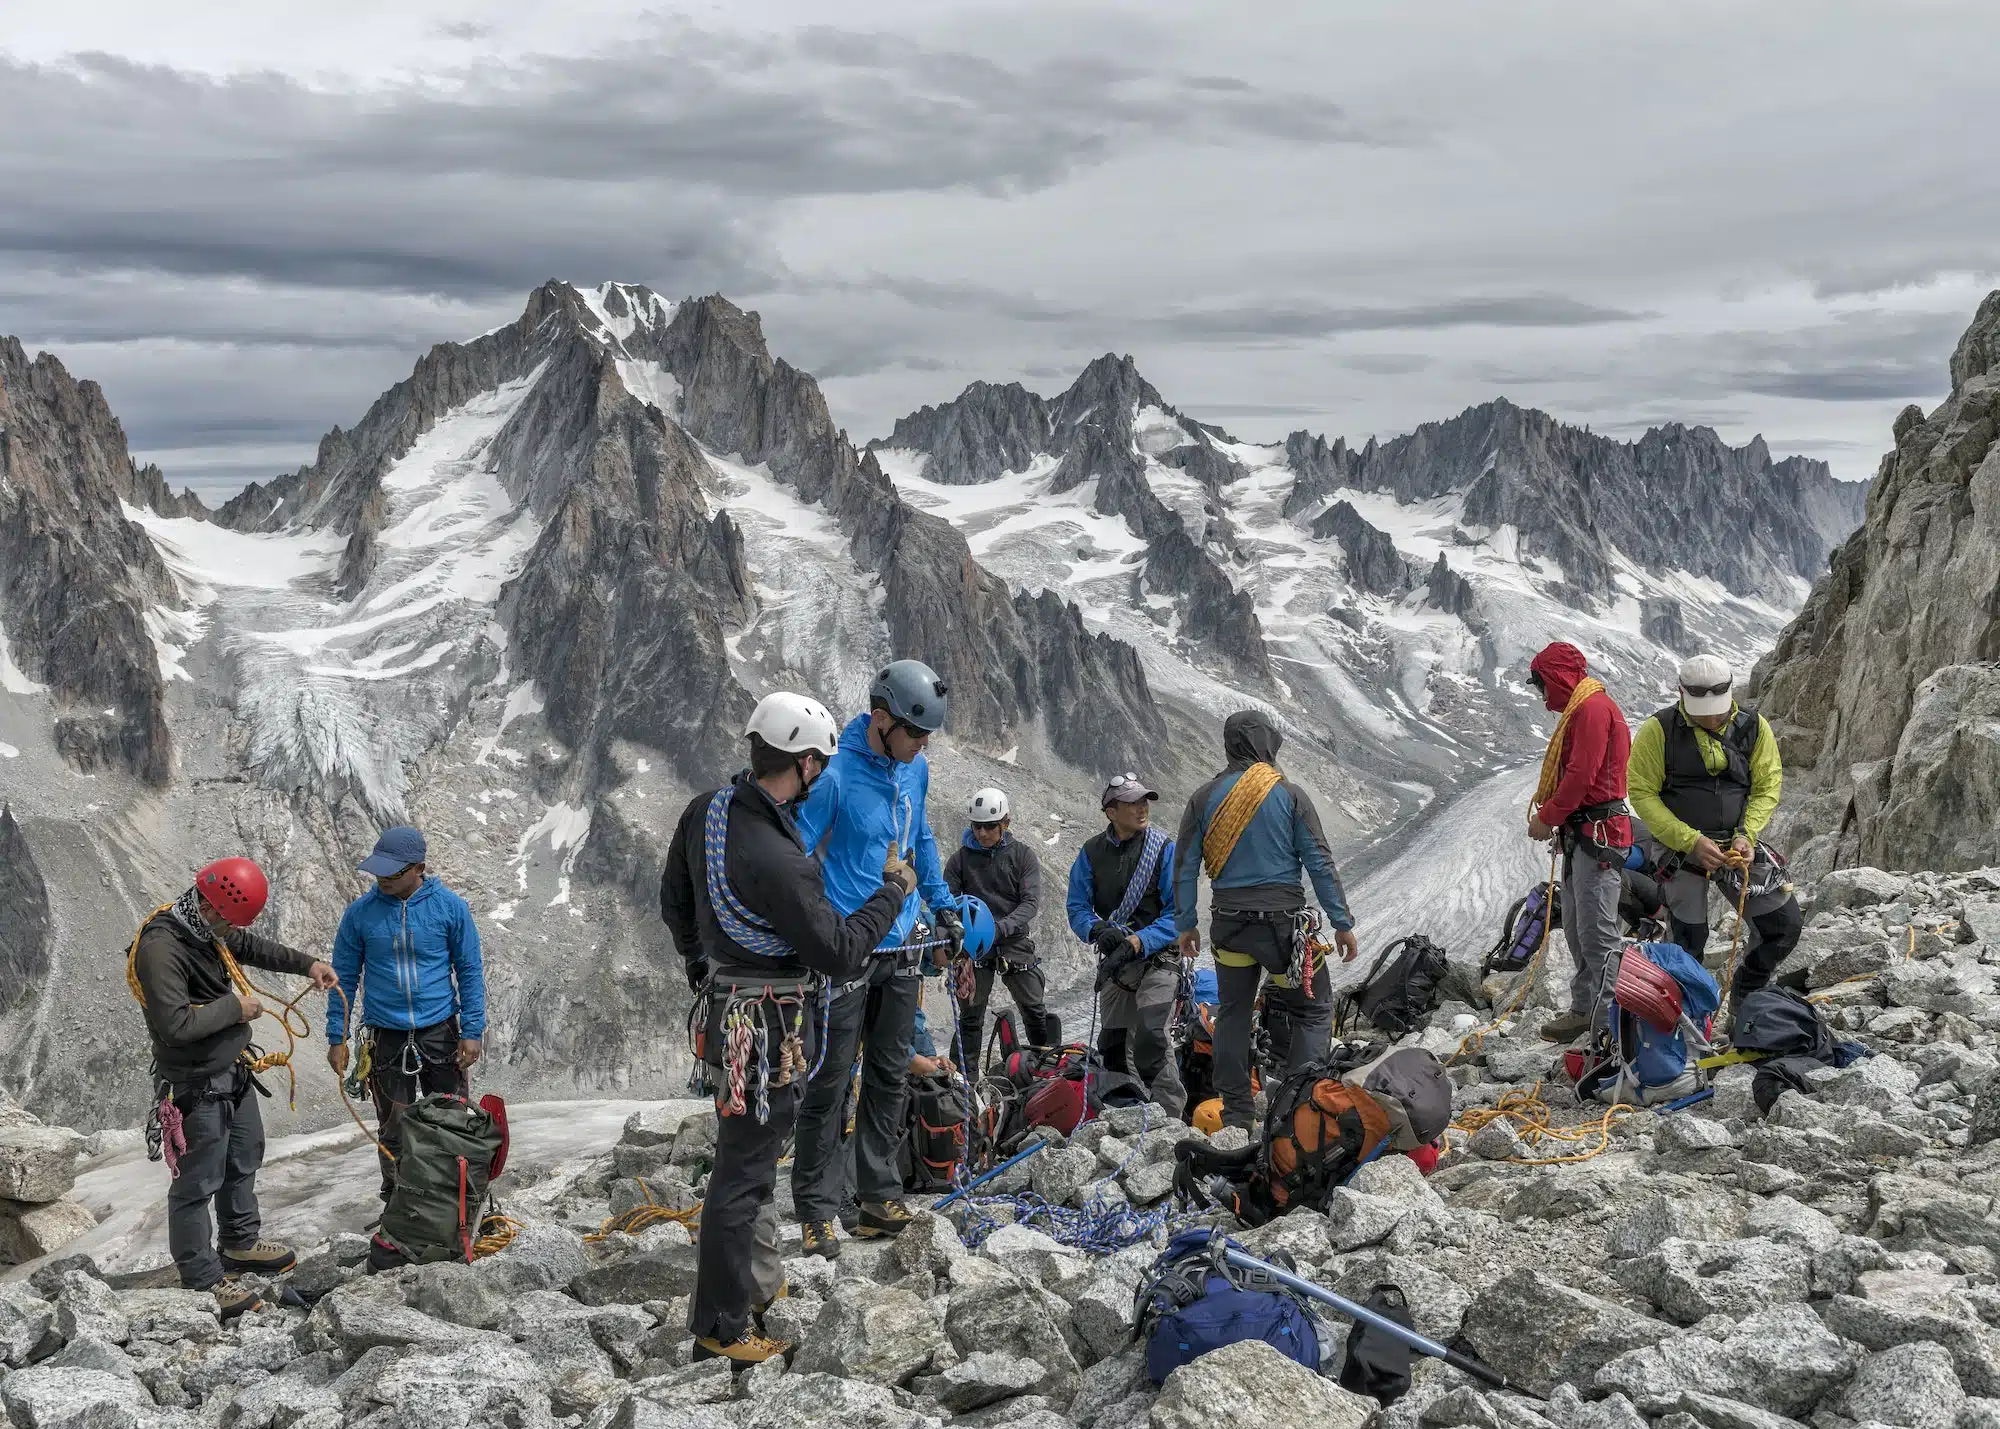 France, Chamonix, Grands Montets, Aiguille d' Argentiere, group of mountaineers preparing